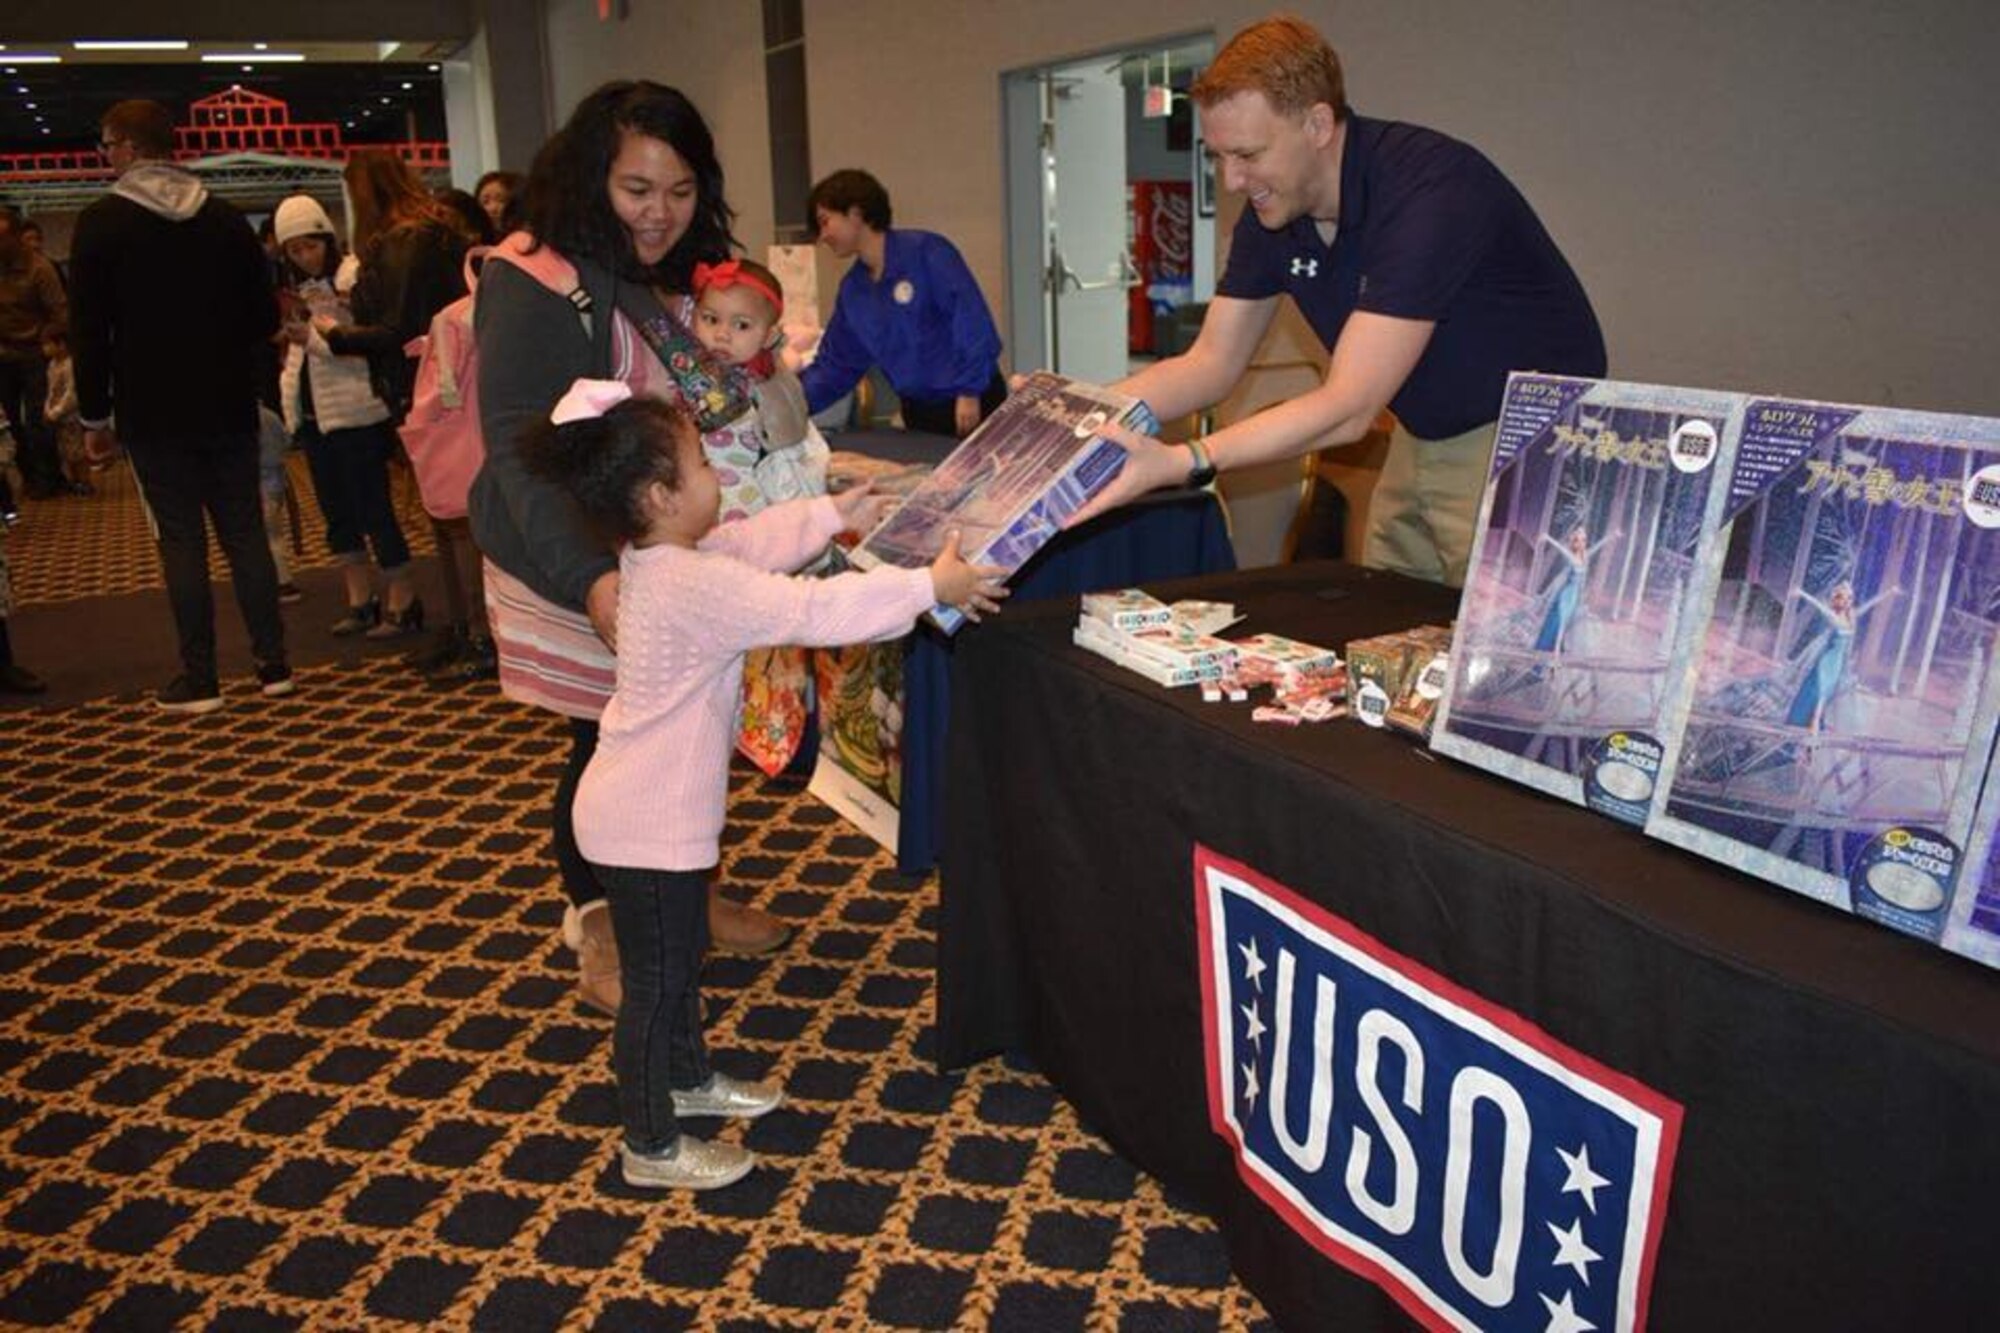 Nathan Evans, United Service Organizations field program manager, gifts a present to a young girl at a USO holiday event at Yokota Air Base, Japan, Dec. 10, 2017.